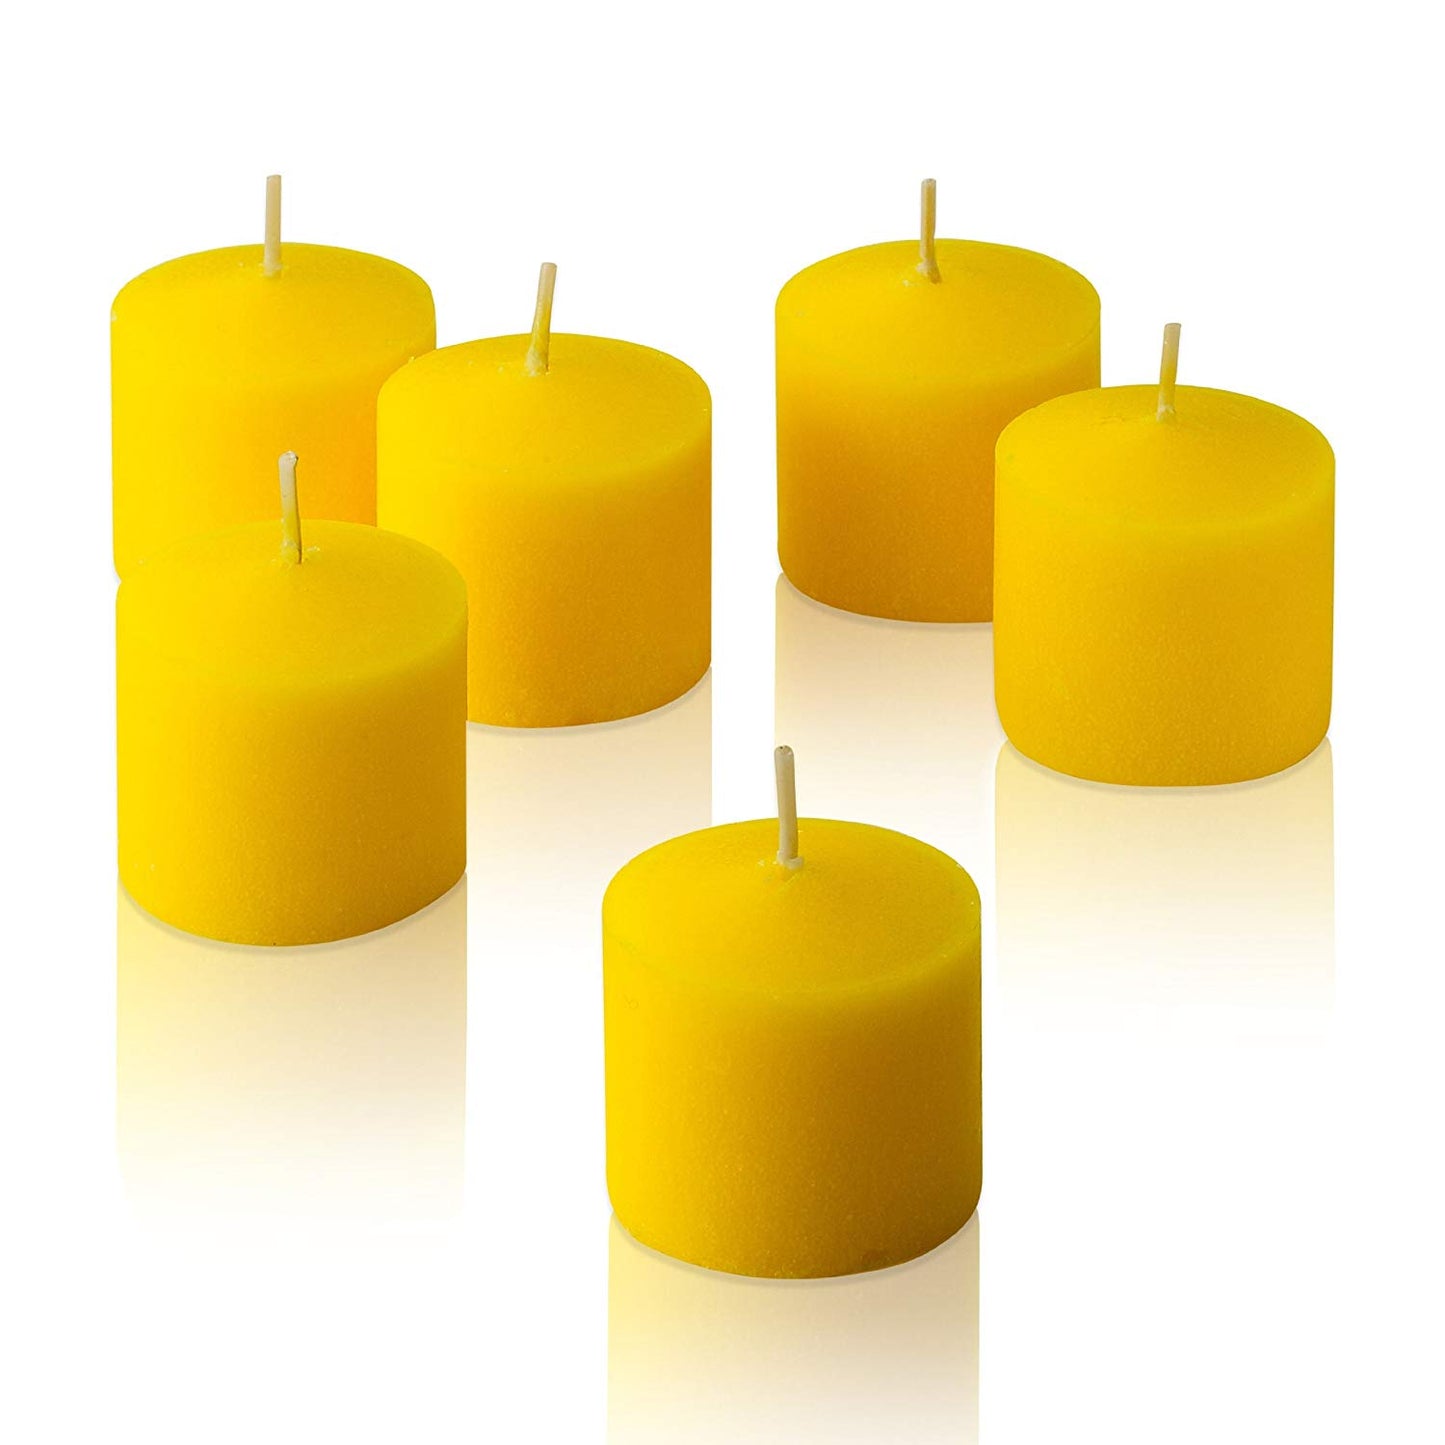 Wax Votive Candles 8 Hours Burning Unscented Ideal for Birthday Aromatherapy Party Candle Gardens & Home Décor (Set of 12, Yellow)